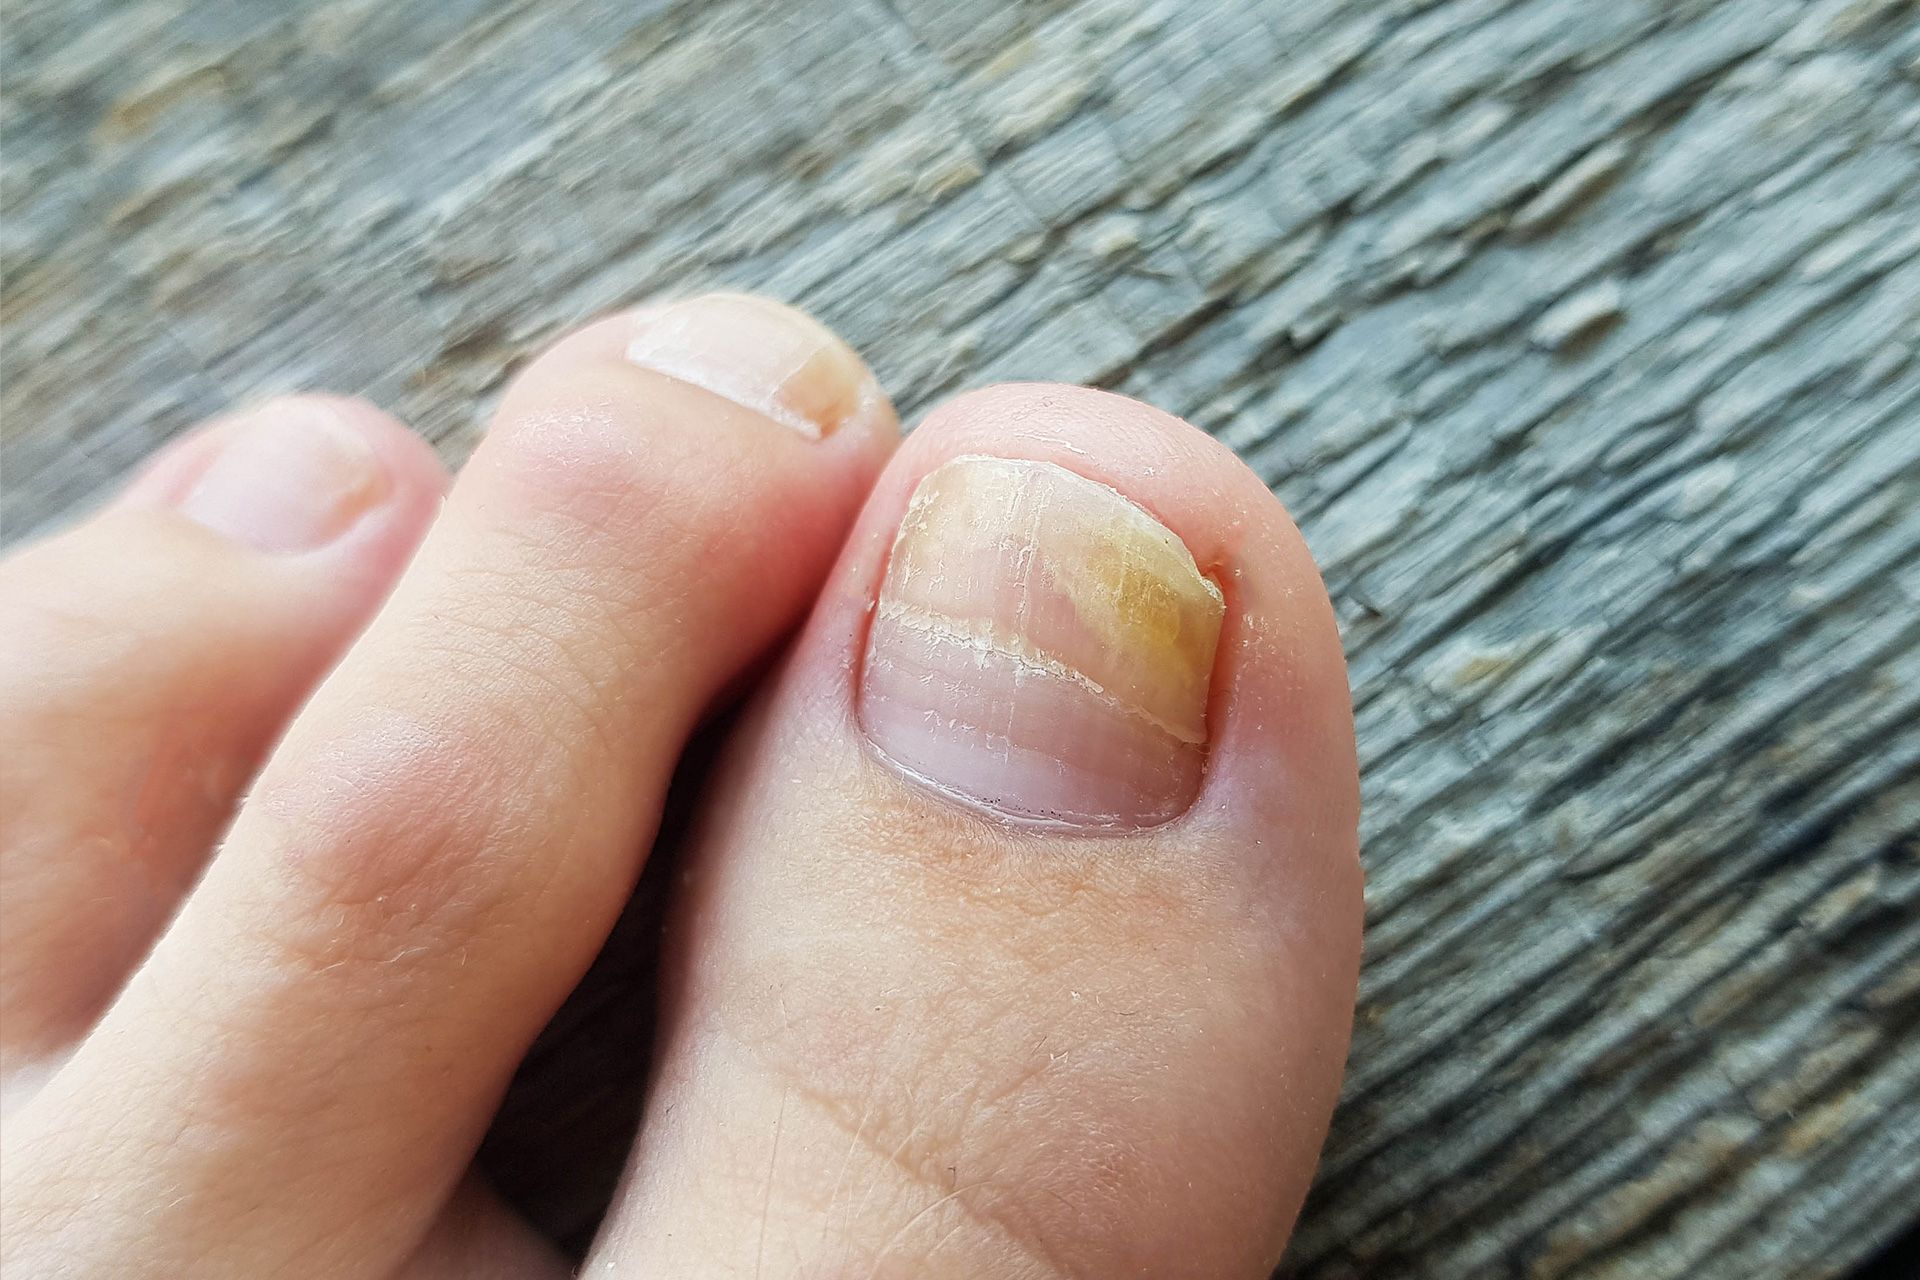 Onychomycosis and Fungal Nail Infections